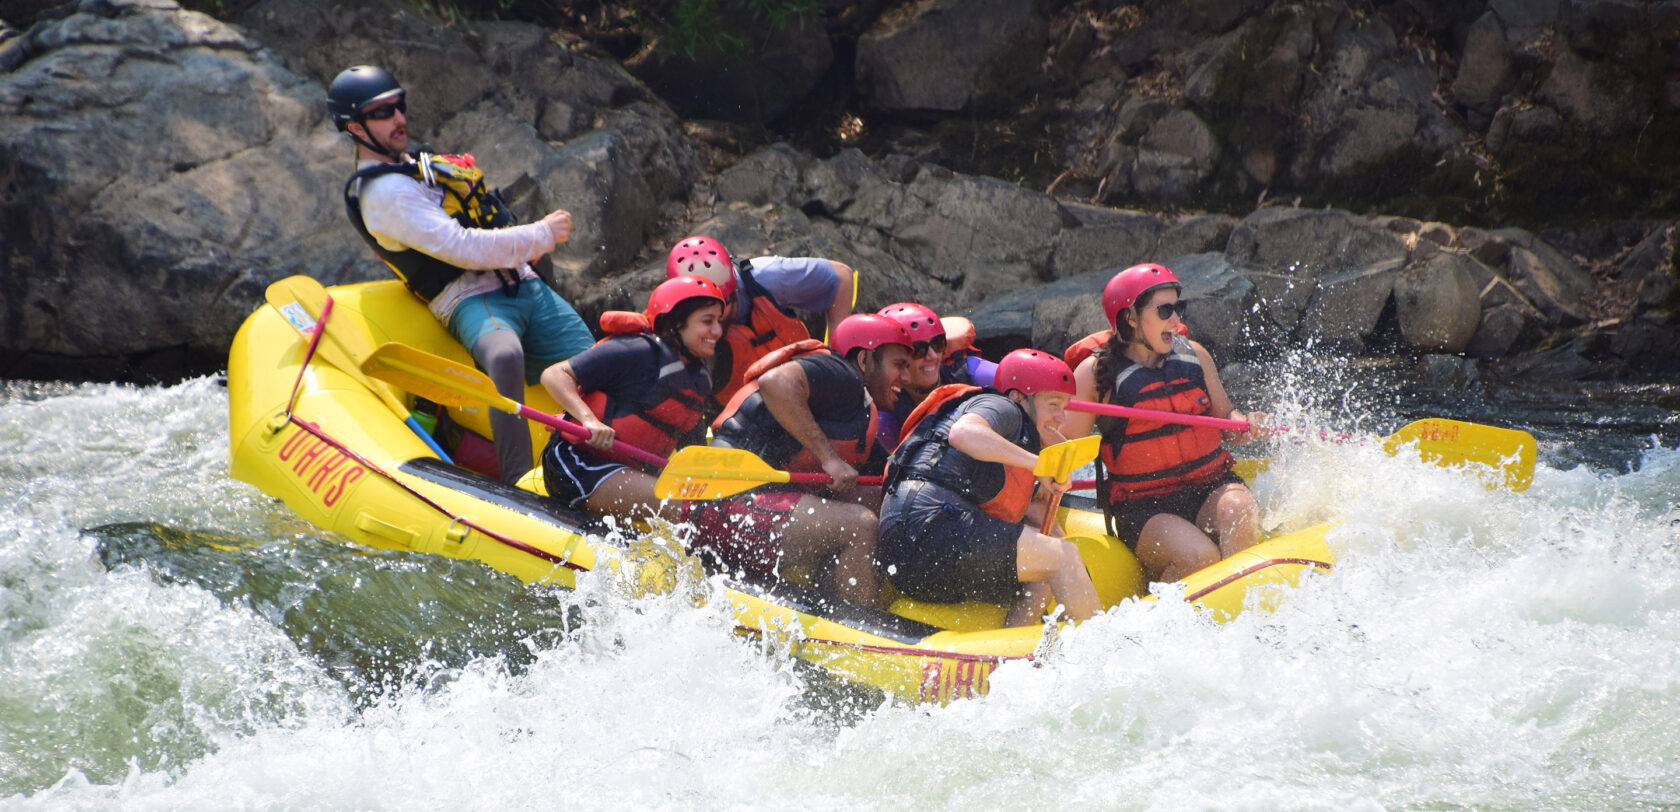 Group of adults rafting on the South Fork American River prepare for big splash